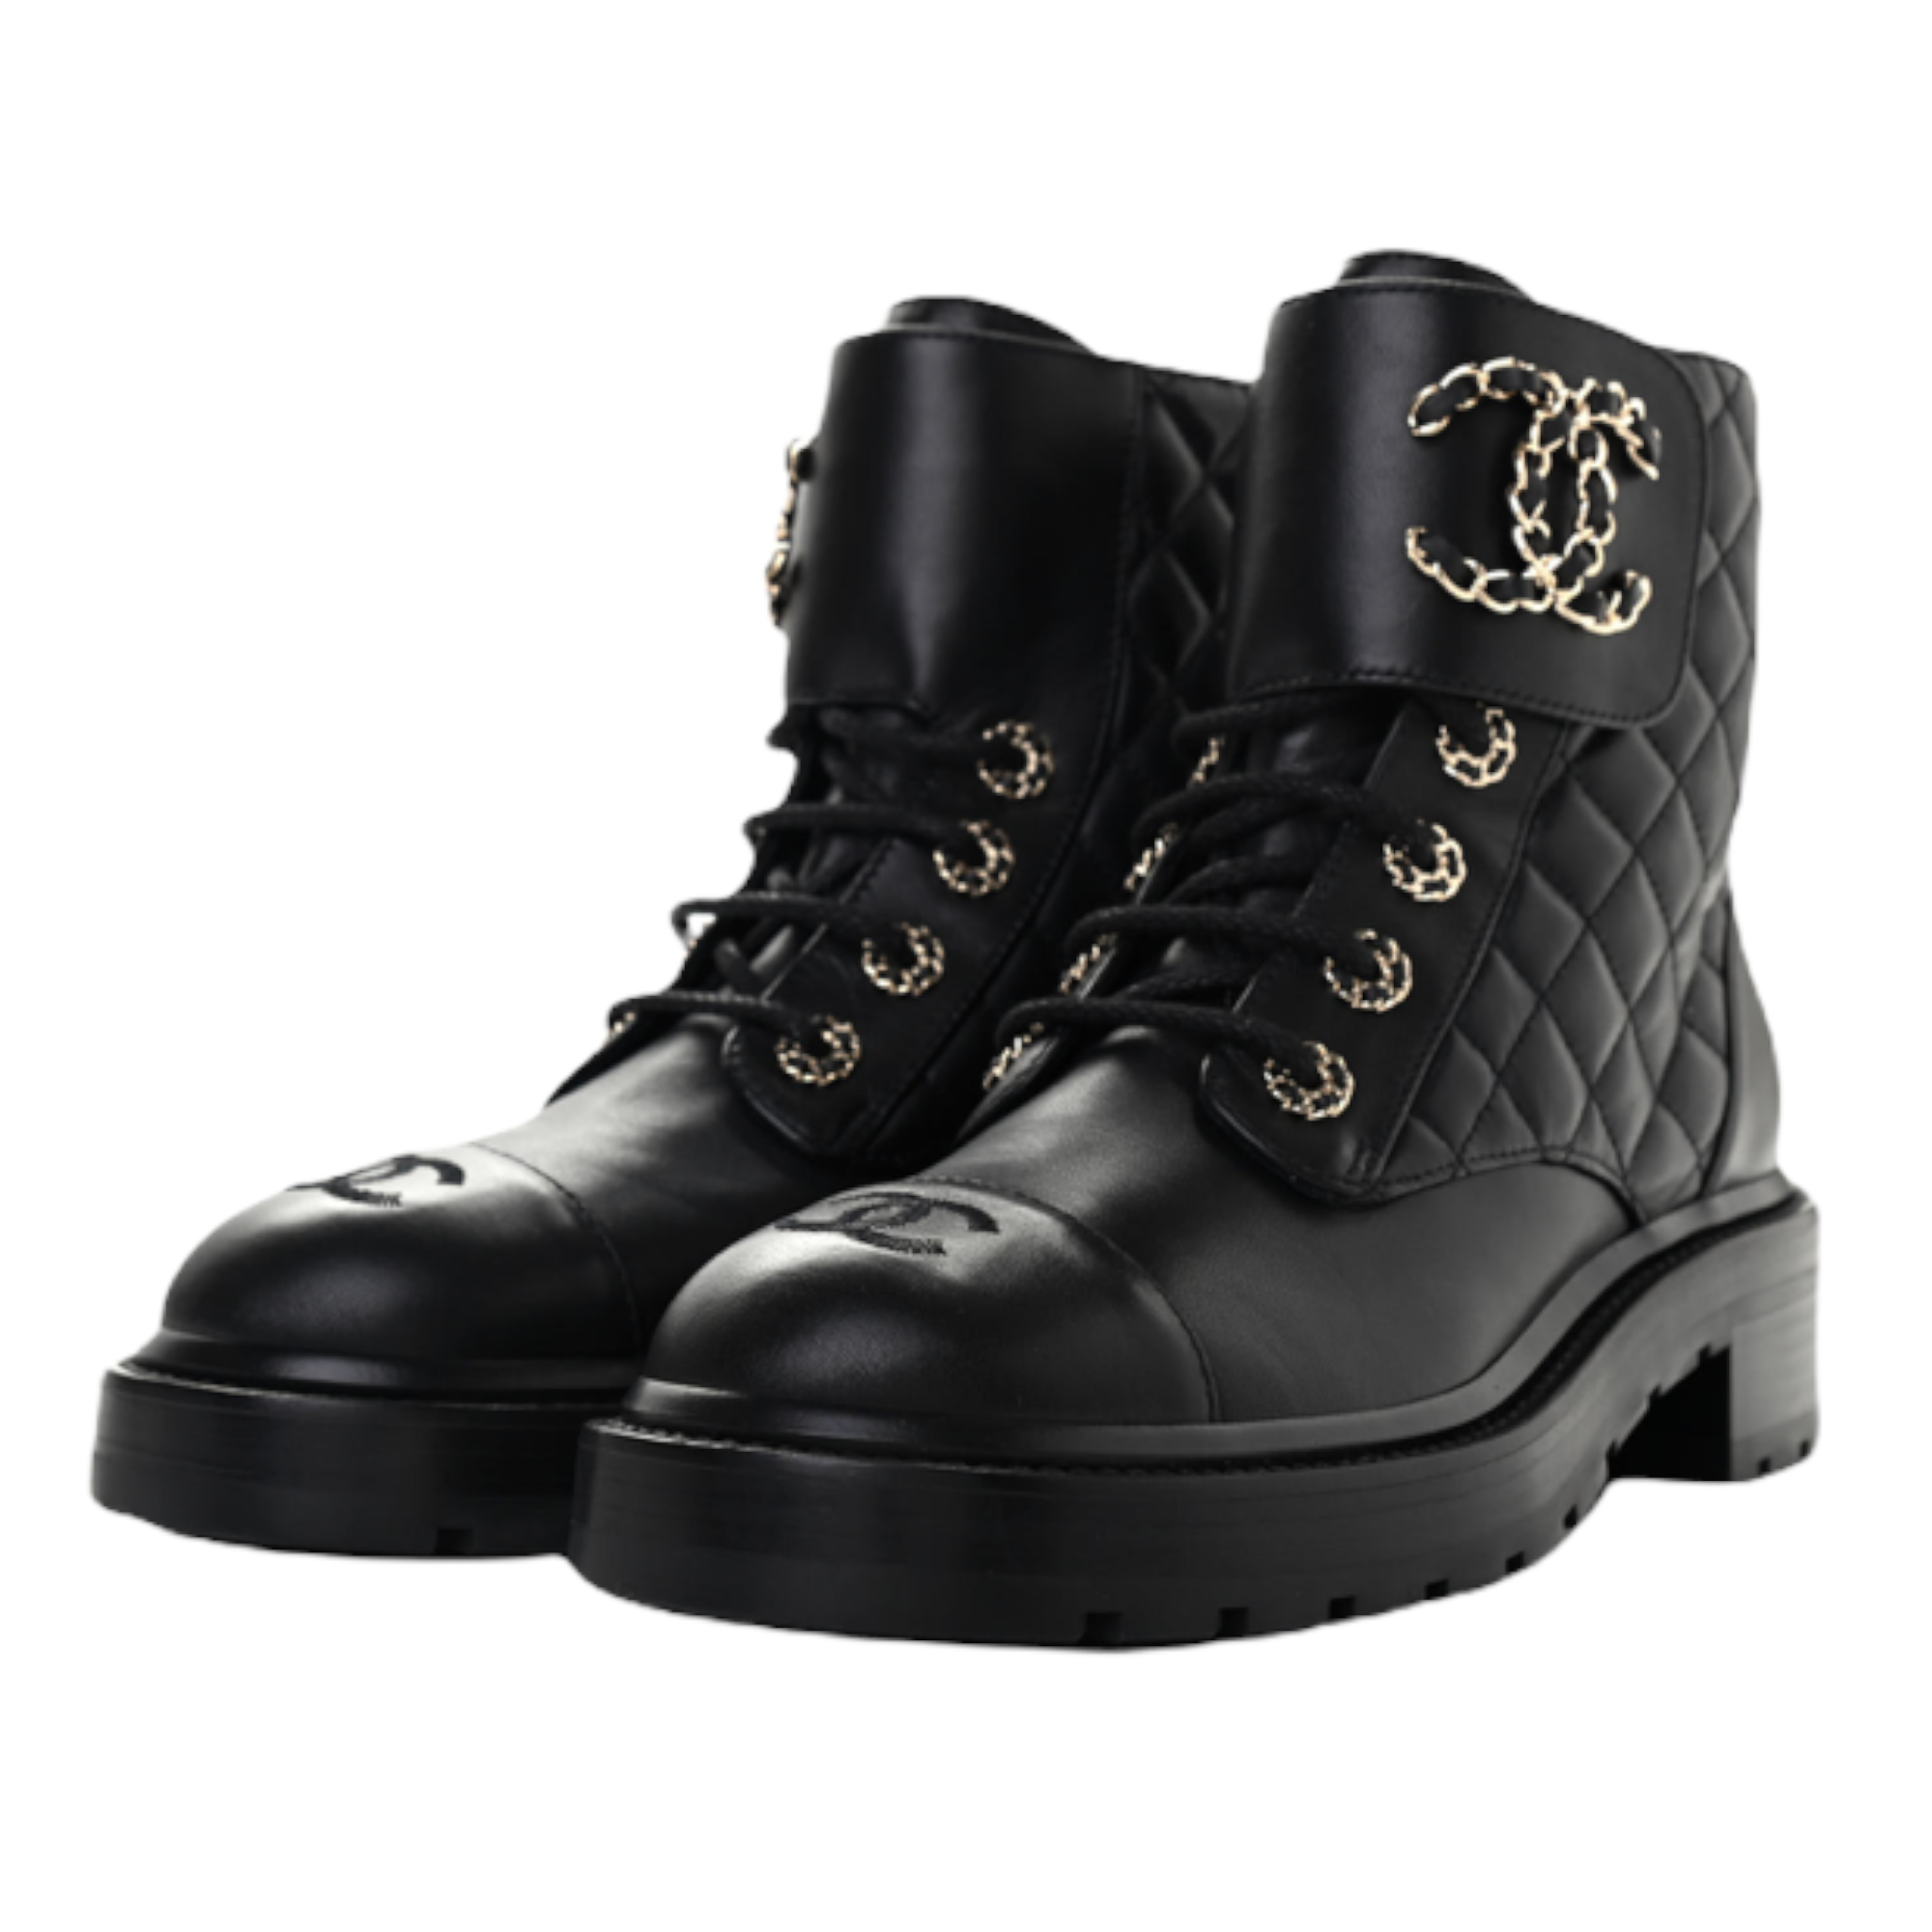 CHANEL Lace Up Boots for Women - Poshmark